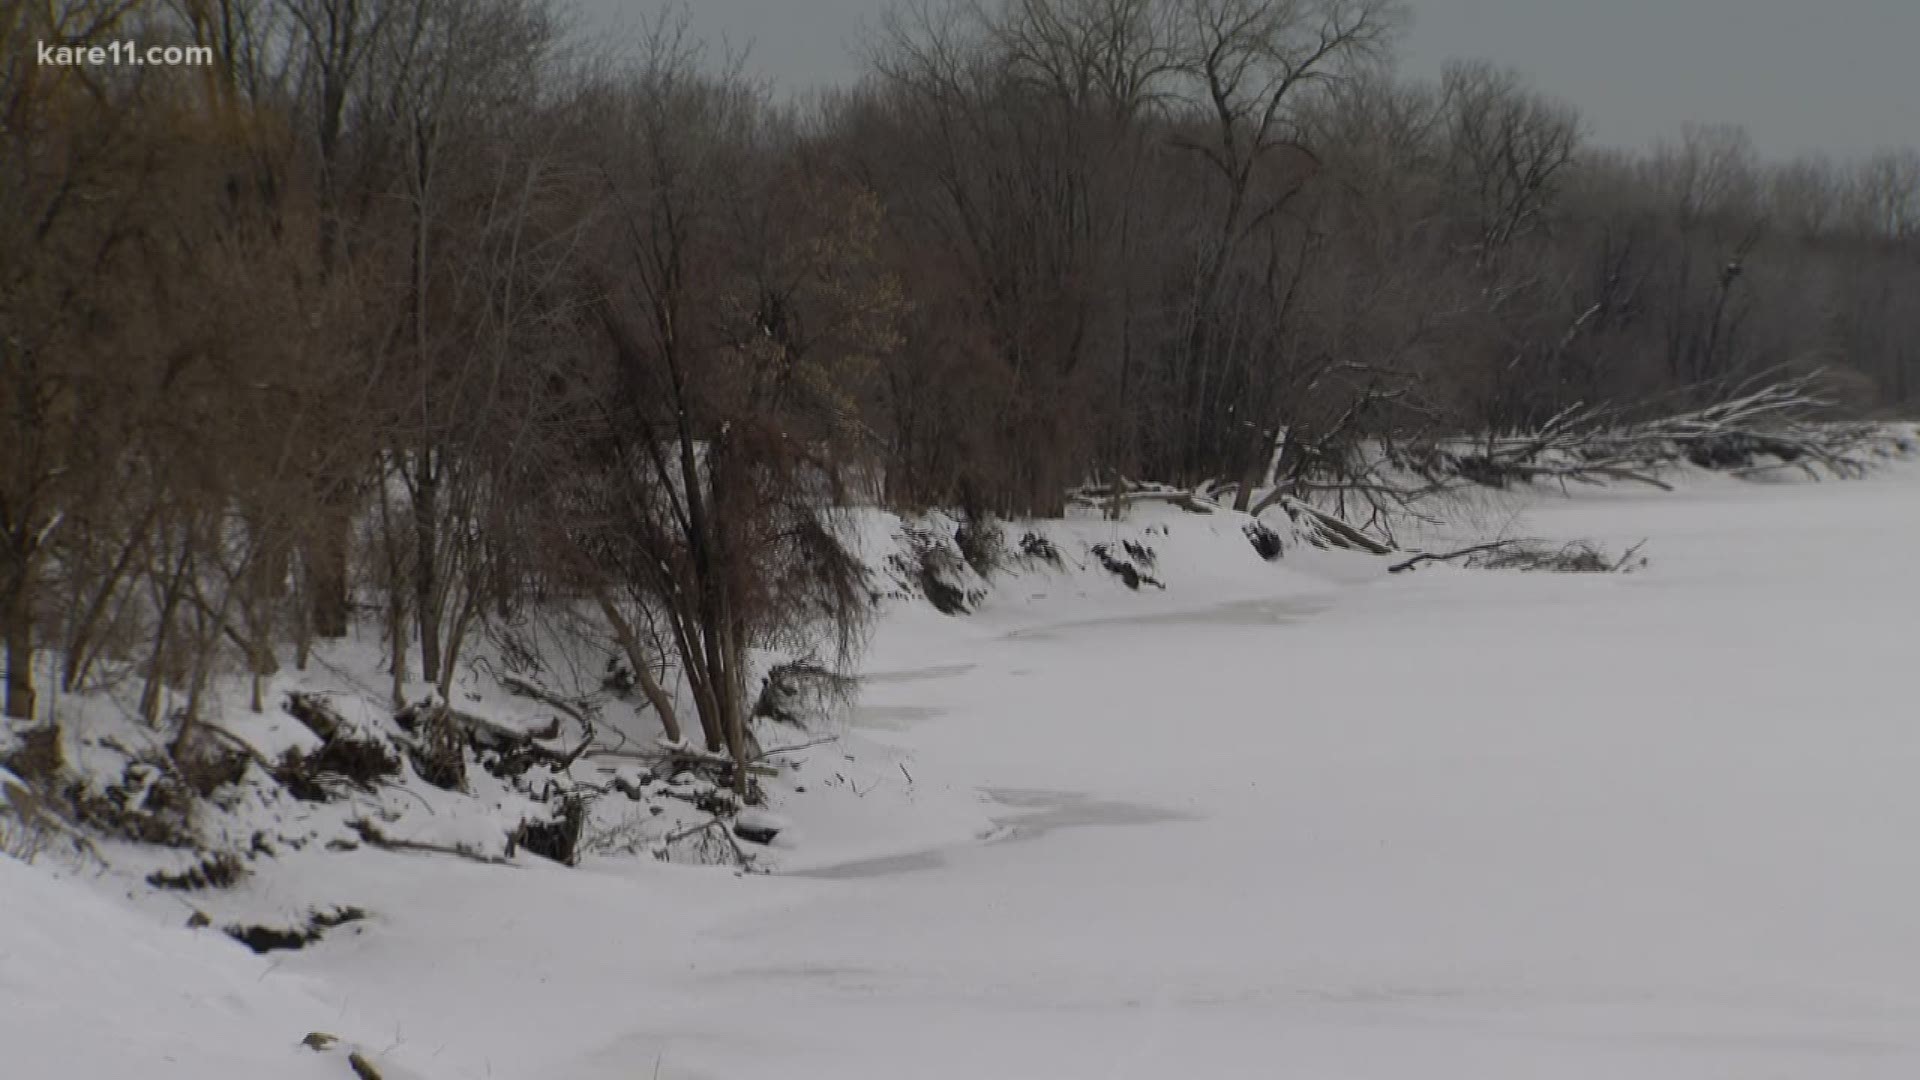 The National Weather Service in Chanhassen said the snowmelt flood threat in the Twin Cities is "higher than it has been in a few years," according to an initial 2019 Spring Flood Outlook released on Wednesday.